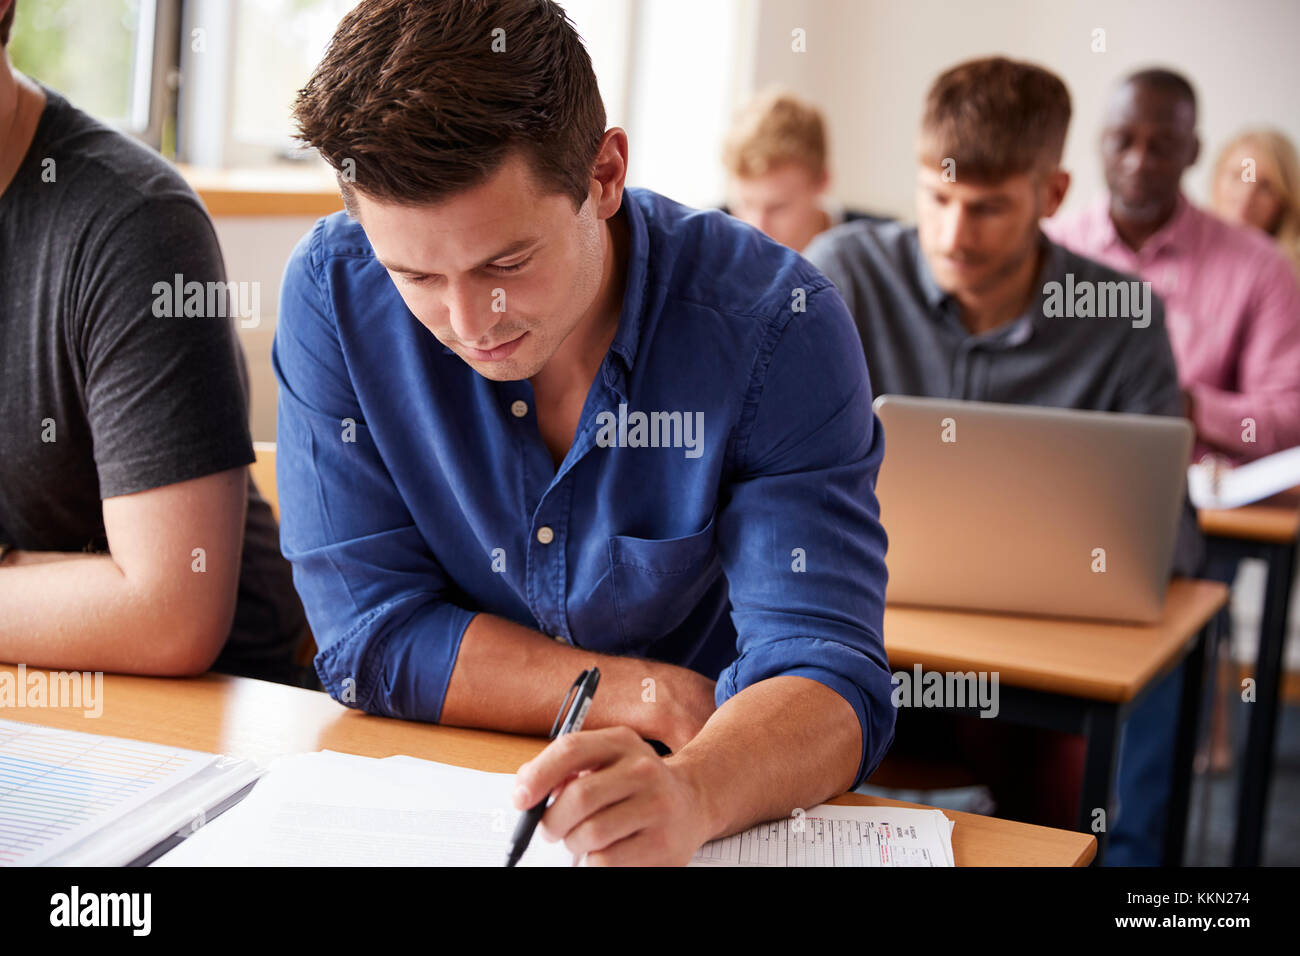 Mature Male Student Attending Adult Education Class Stock Photo